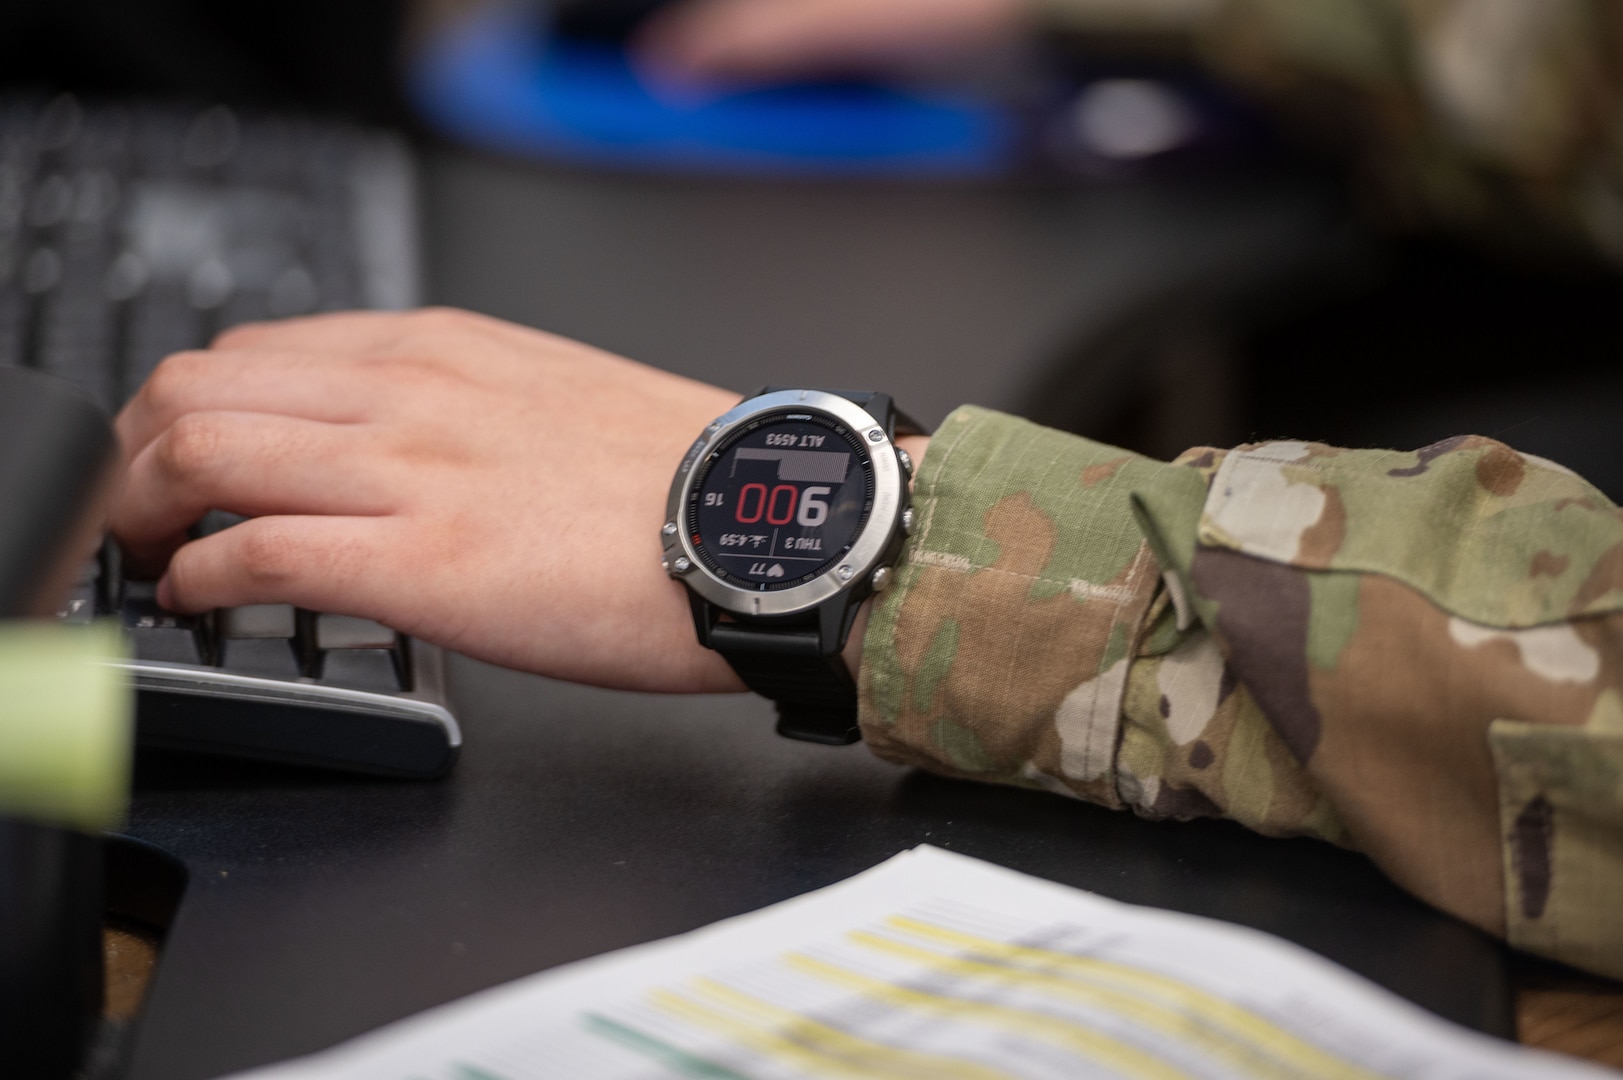 An airman's arm is pictured wearing a digital watch.